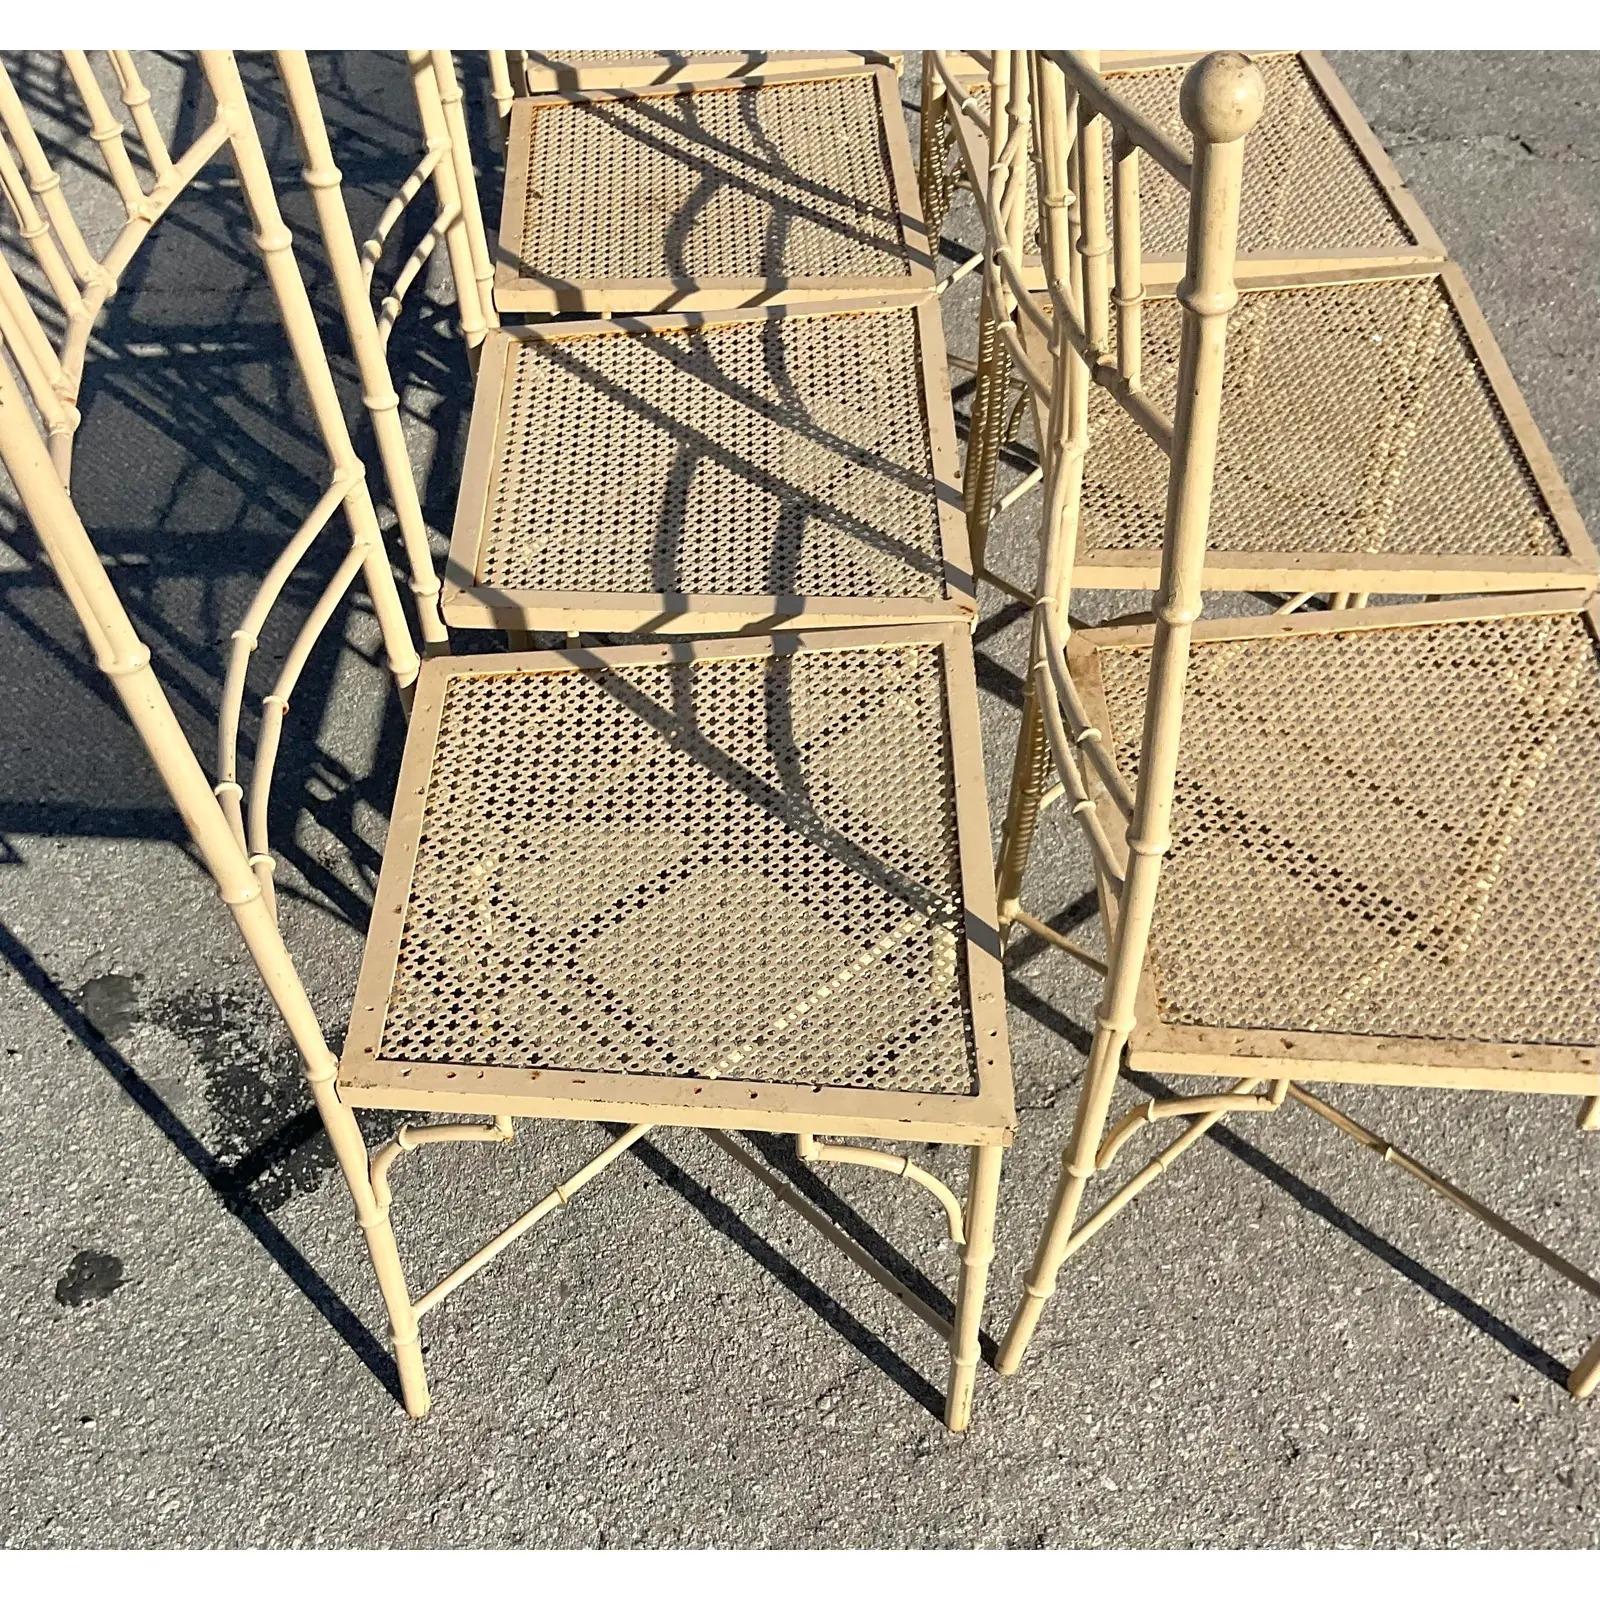 An exceptional set of 8 vintage outdoor dining chairs. Beautiful Italian metal chairs with a chic bamboo design. Perfect as is or have them redone in your favorite color. You decide! Acquired from a Palm Beach estate.

The chairs are in great